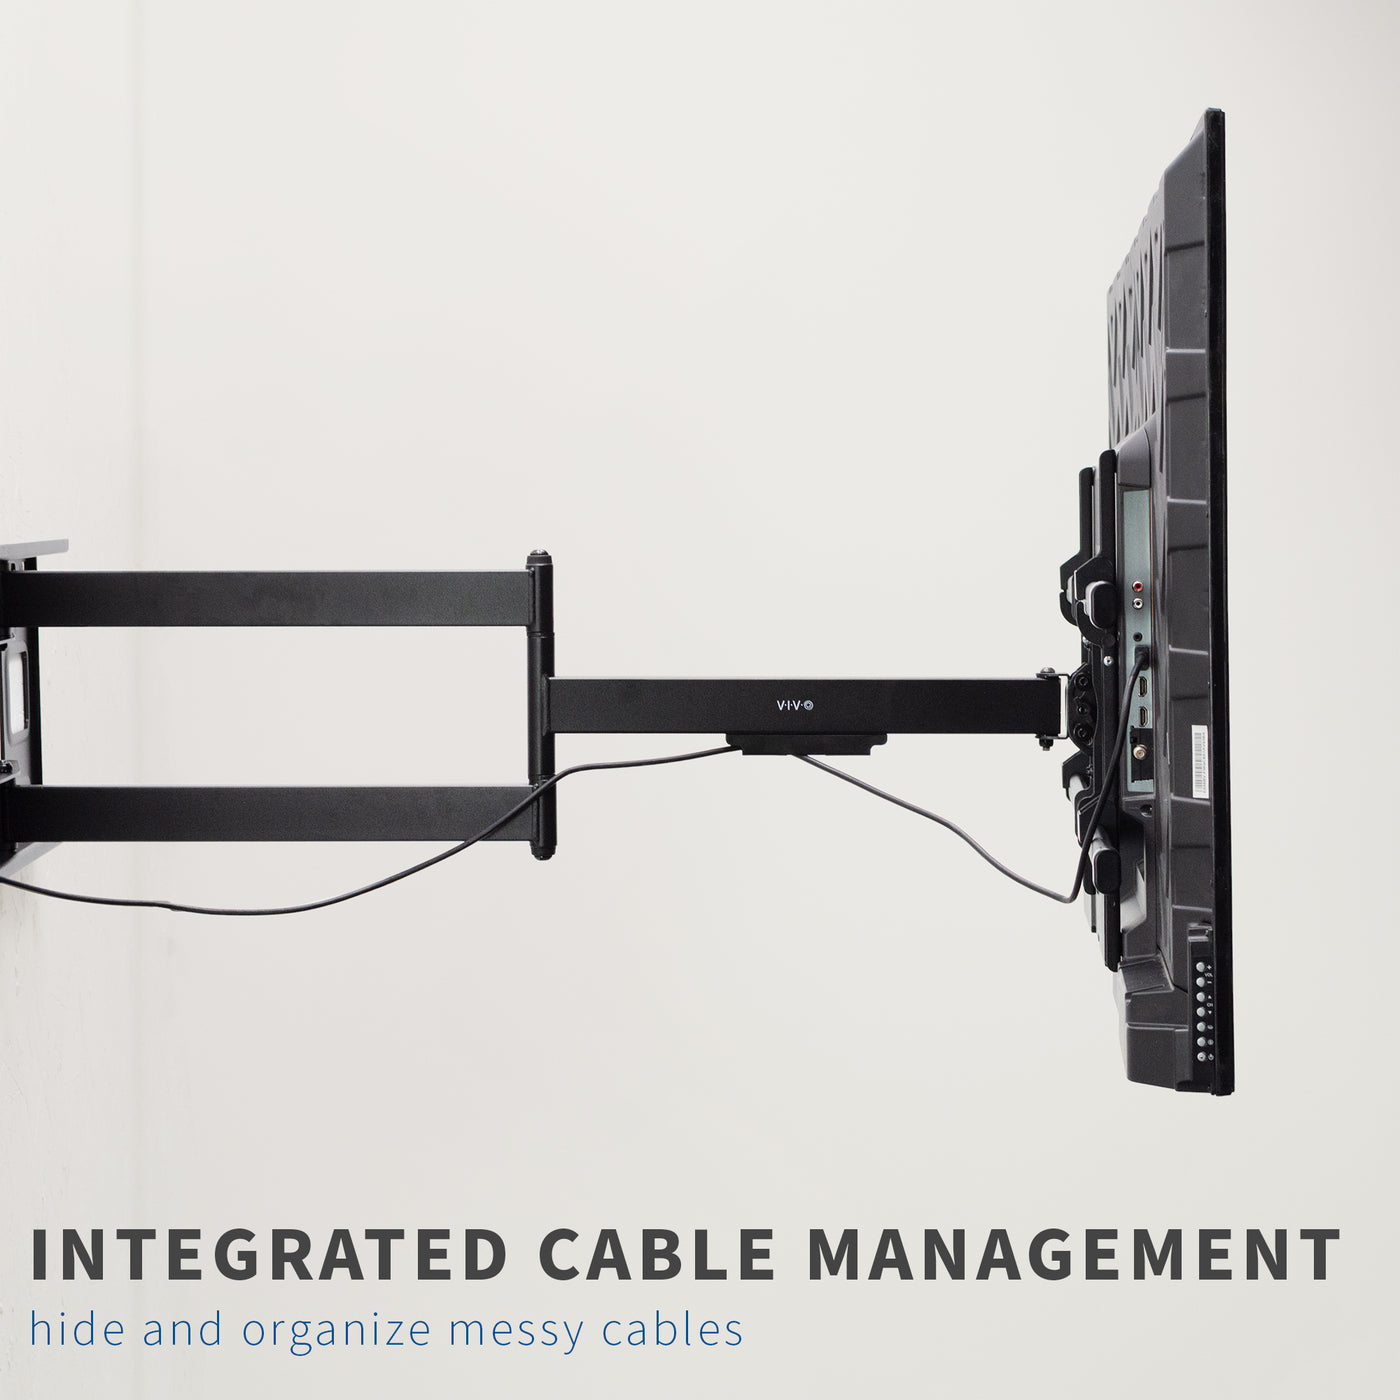 Integrated cable management that prevents tangling or exposed hanging cords.